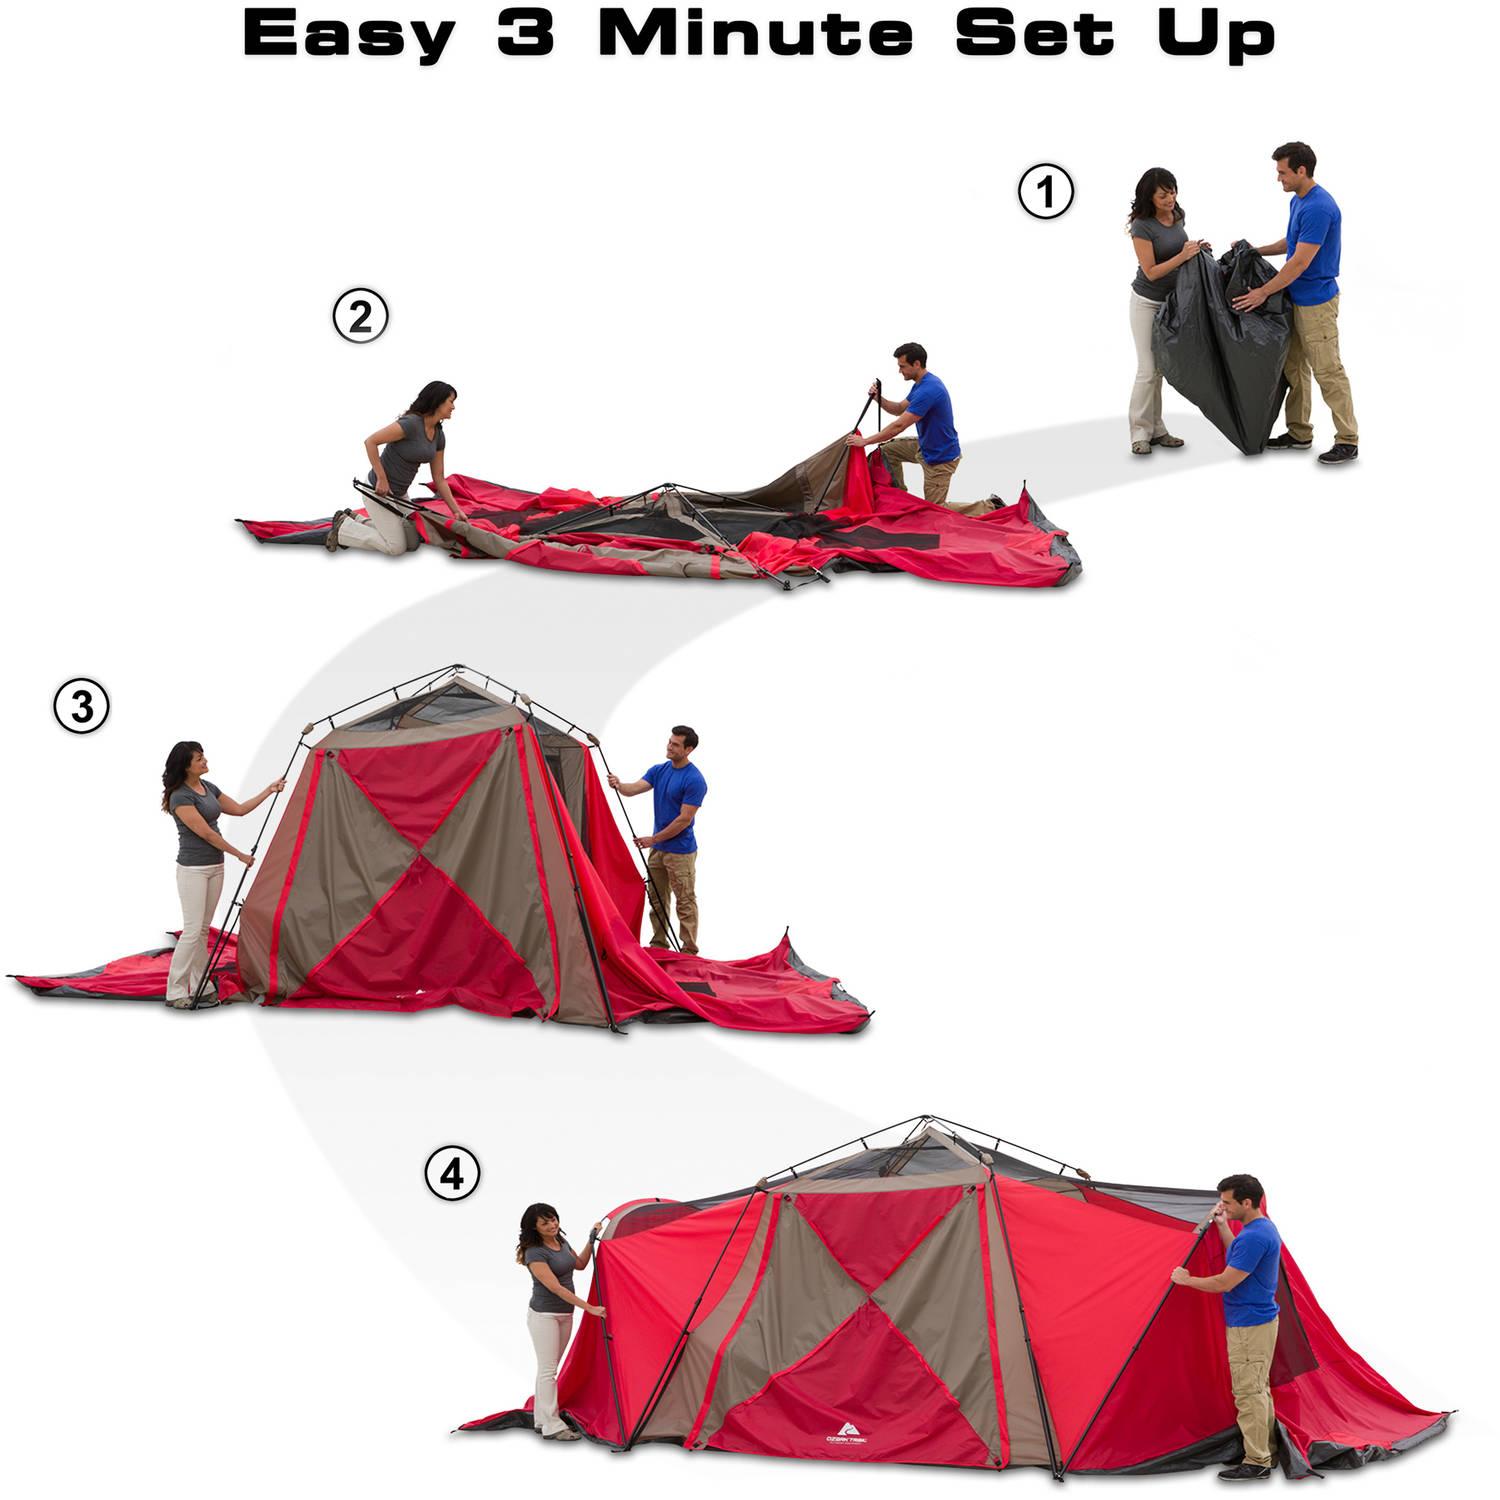 Ozark Trail 21' x 10' 3-Room Instant Tent with Awning, Sleeps 12, Red - image 3 of 11